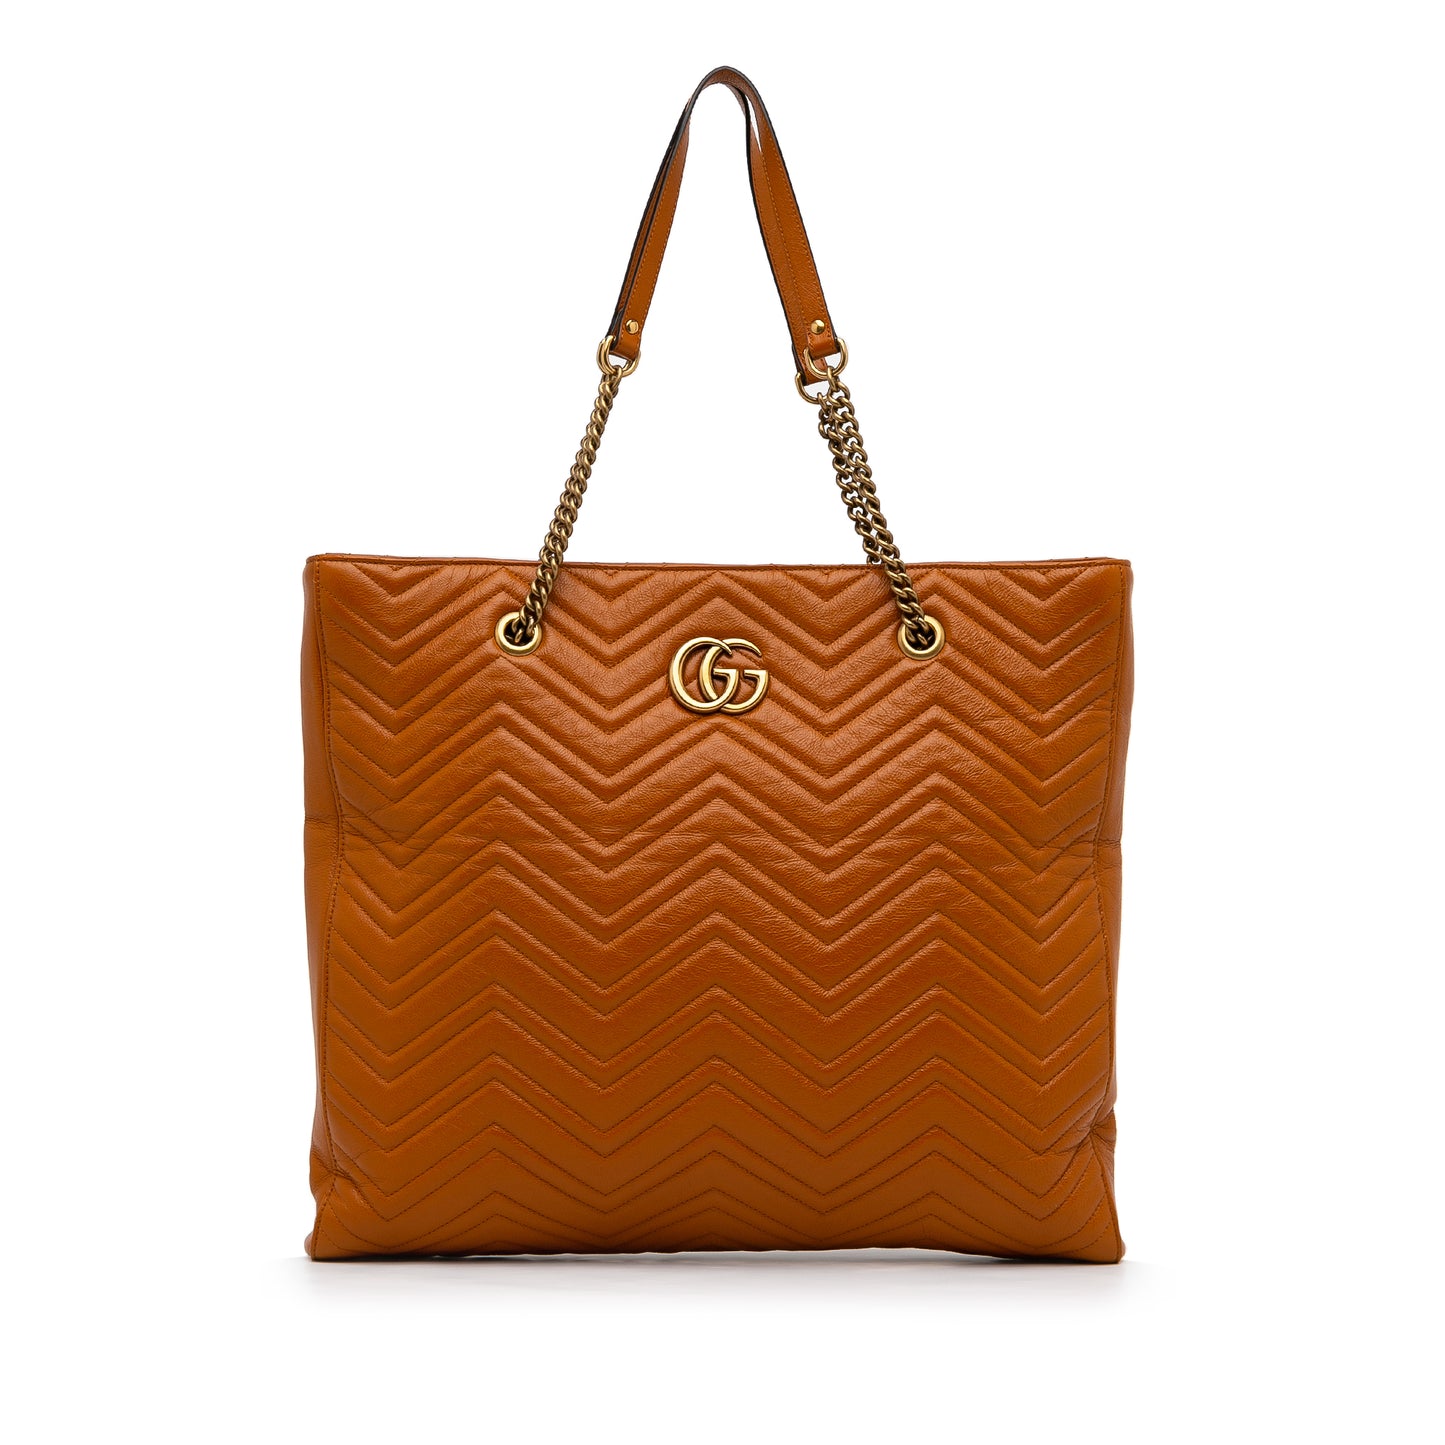 GG Marmont Tote Bag